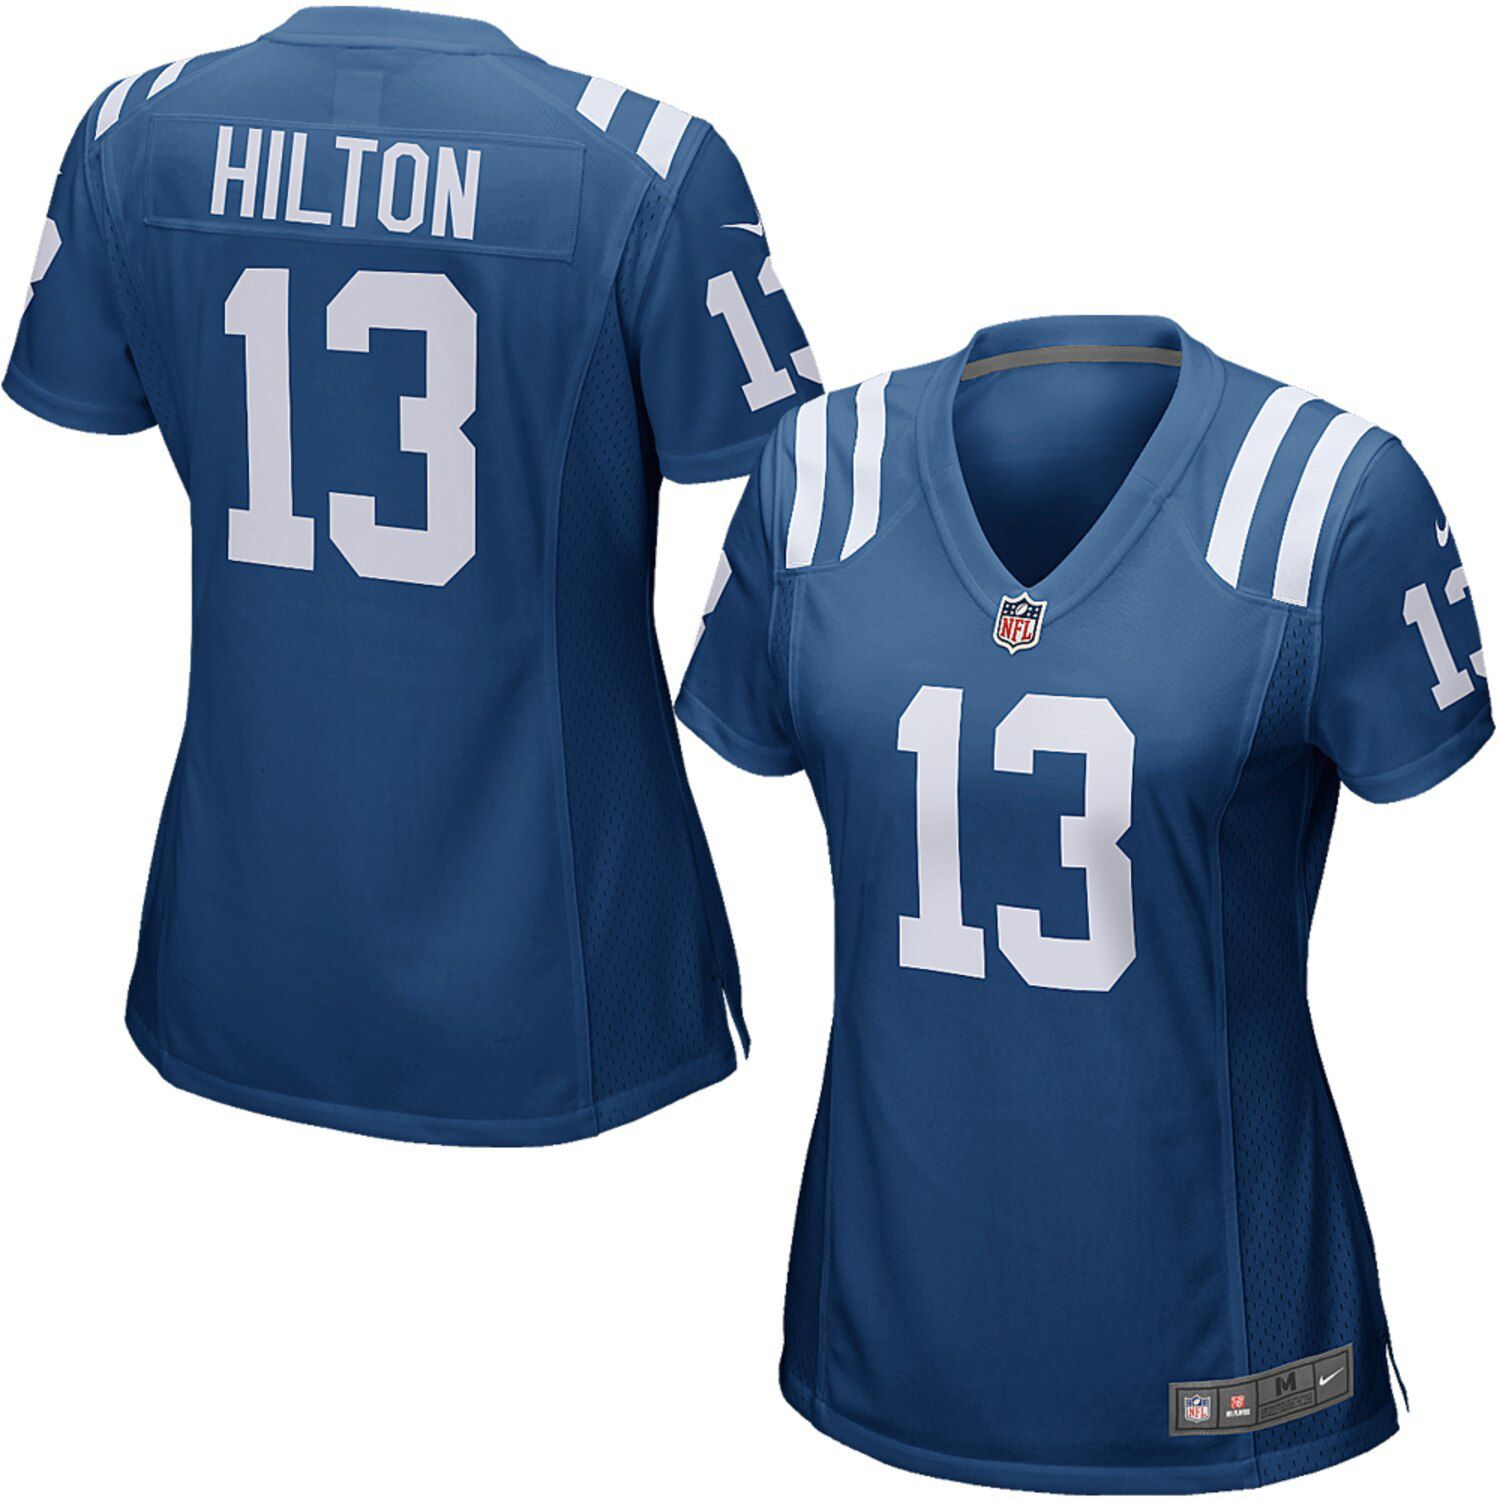 Indianapolis Colts Game Jersey